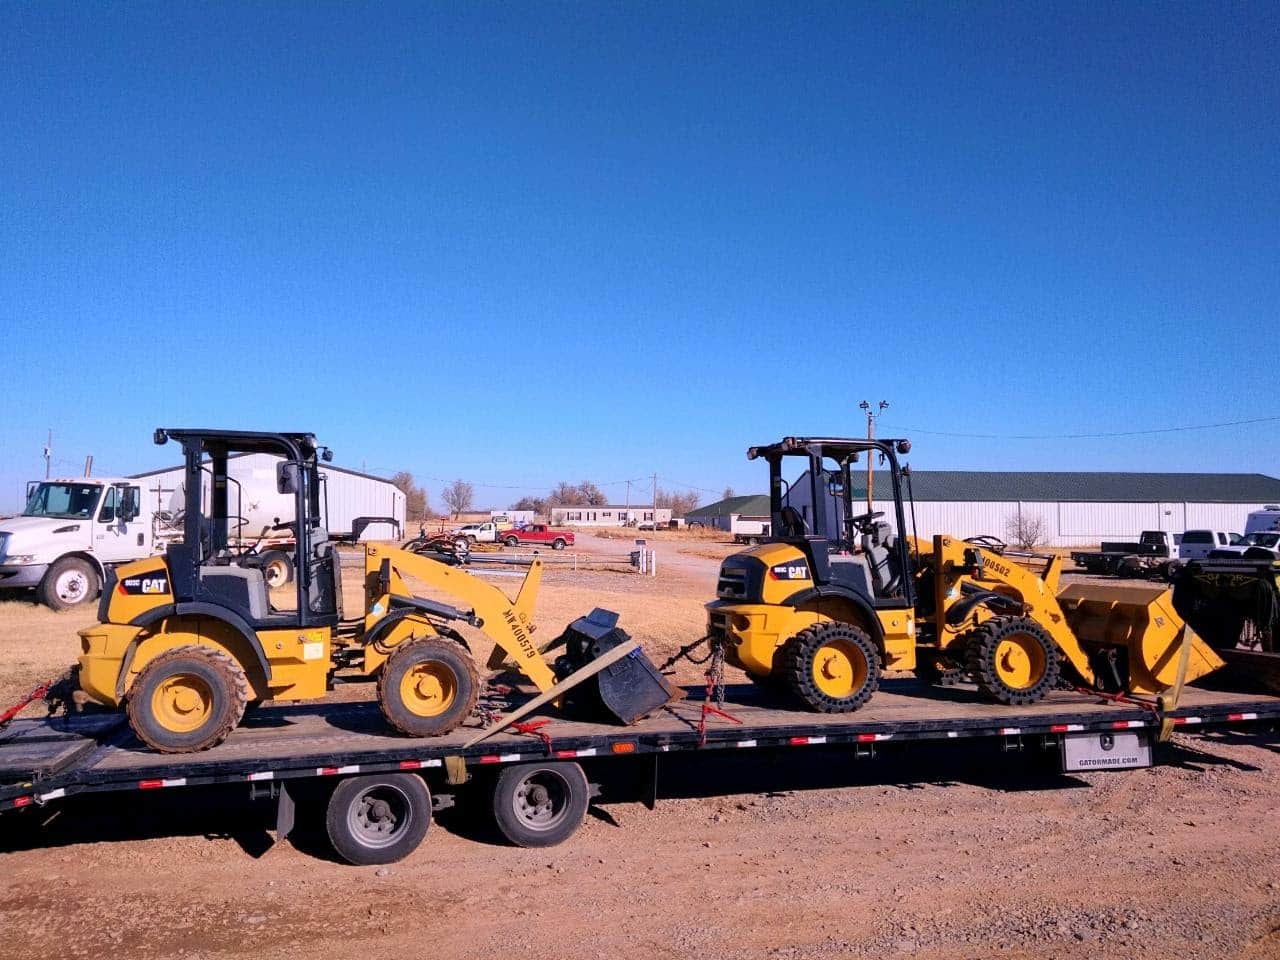 Two CAT tractors loaded for transport